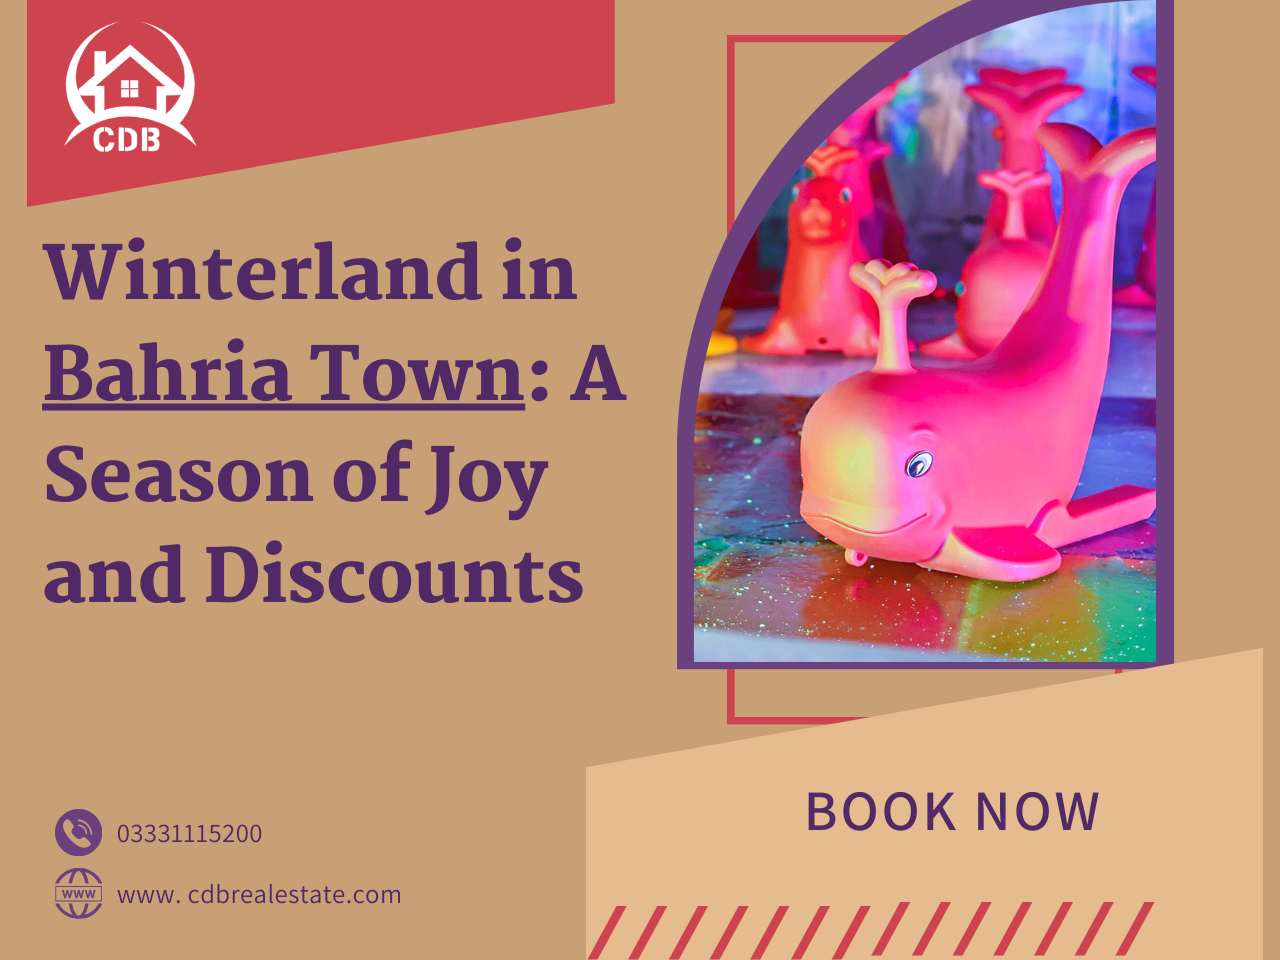 Winterland in Bahria Town: A Season of Joy and Discounts